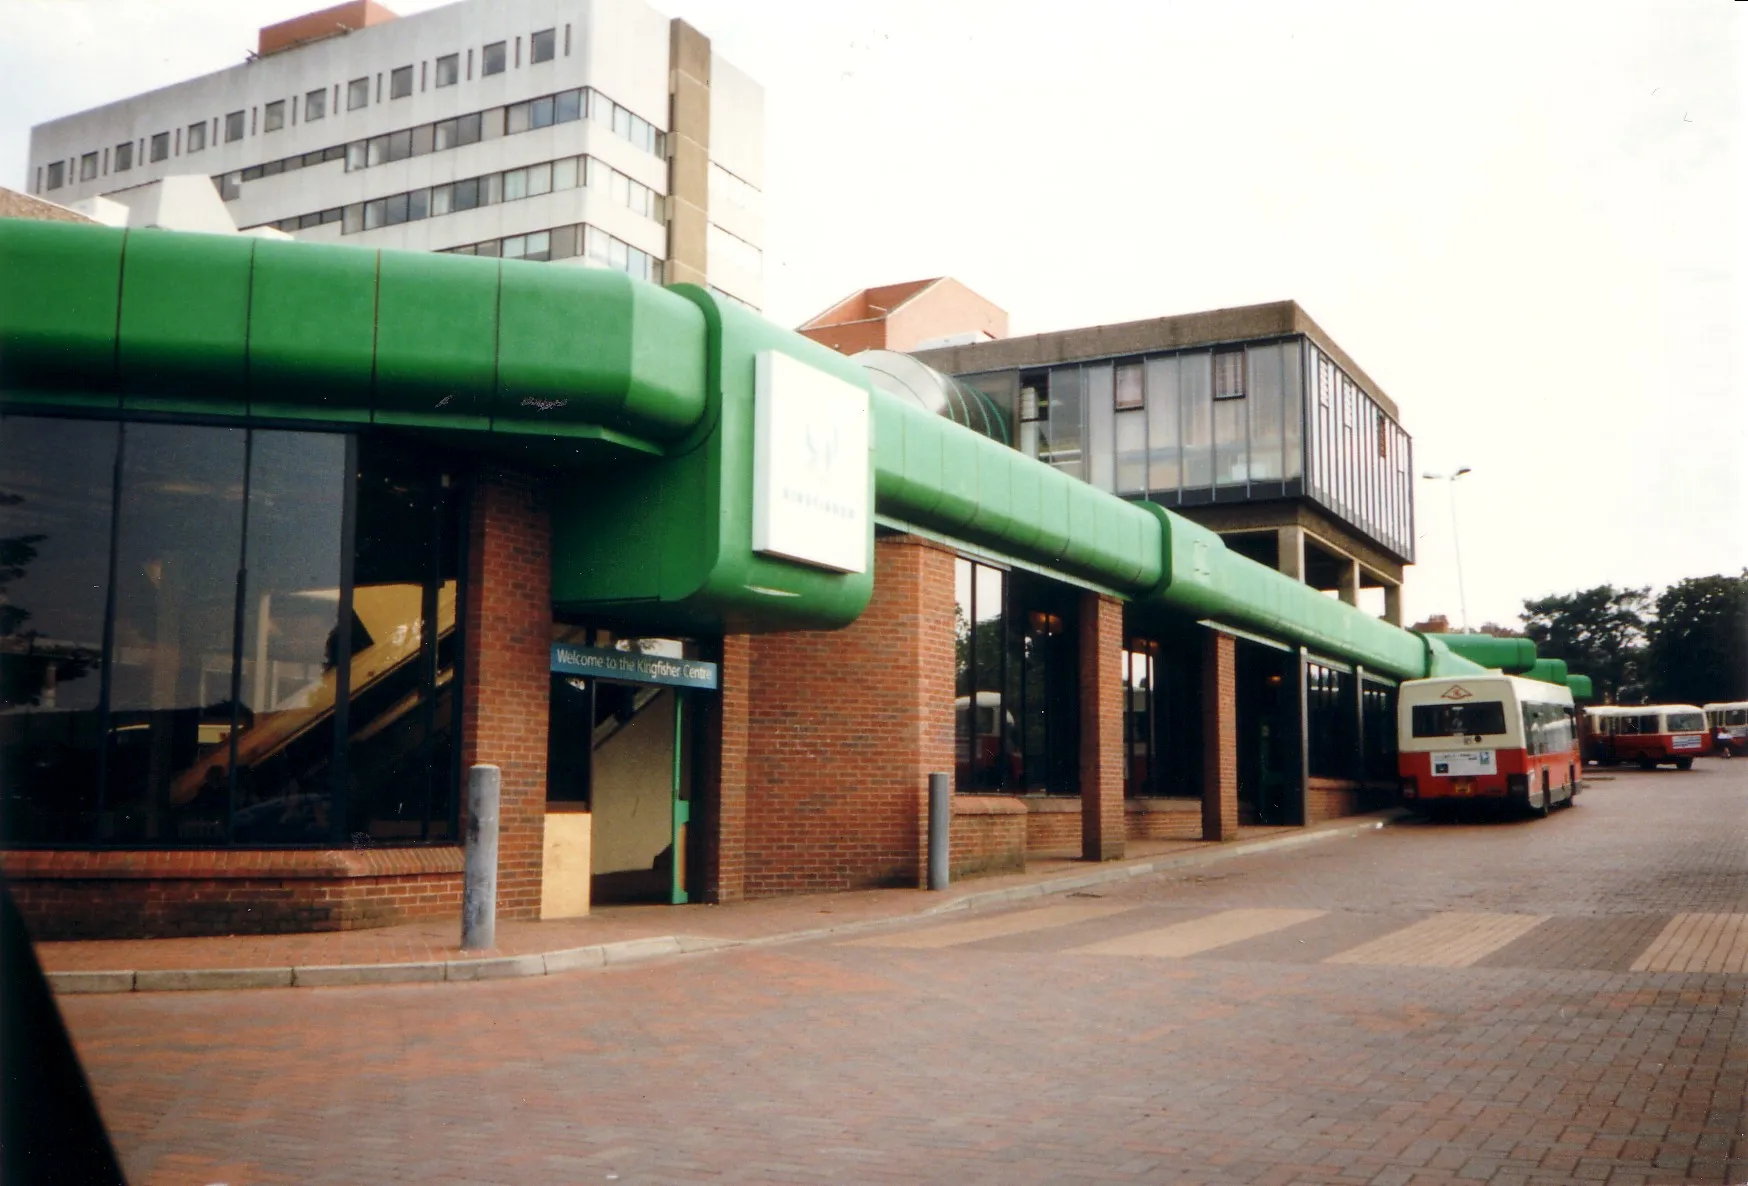 Photo showing: Photo of Redditch Bus station in Redditch, Worcestershire, UK, taken by me circa 1996. This building stands on the site of the original Redditch railway station, on the South side of Bromsgrove Road. It was demolished in 2000. Its distinctive green-and-glass look made it something of a local landmark. The famous Redditch postcard picture was taken from a similar angle.